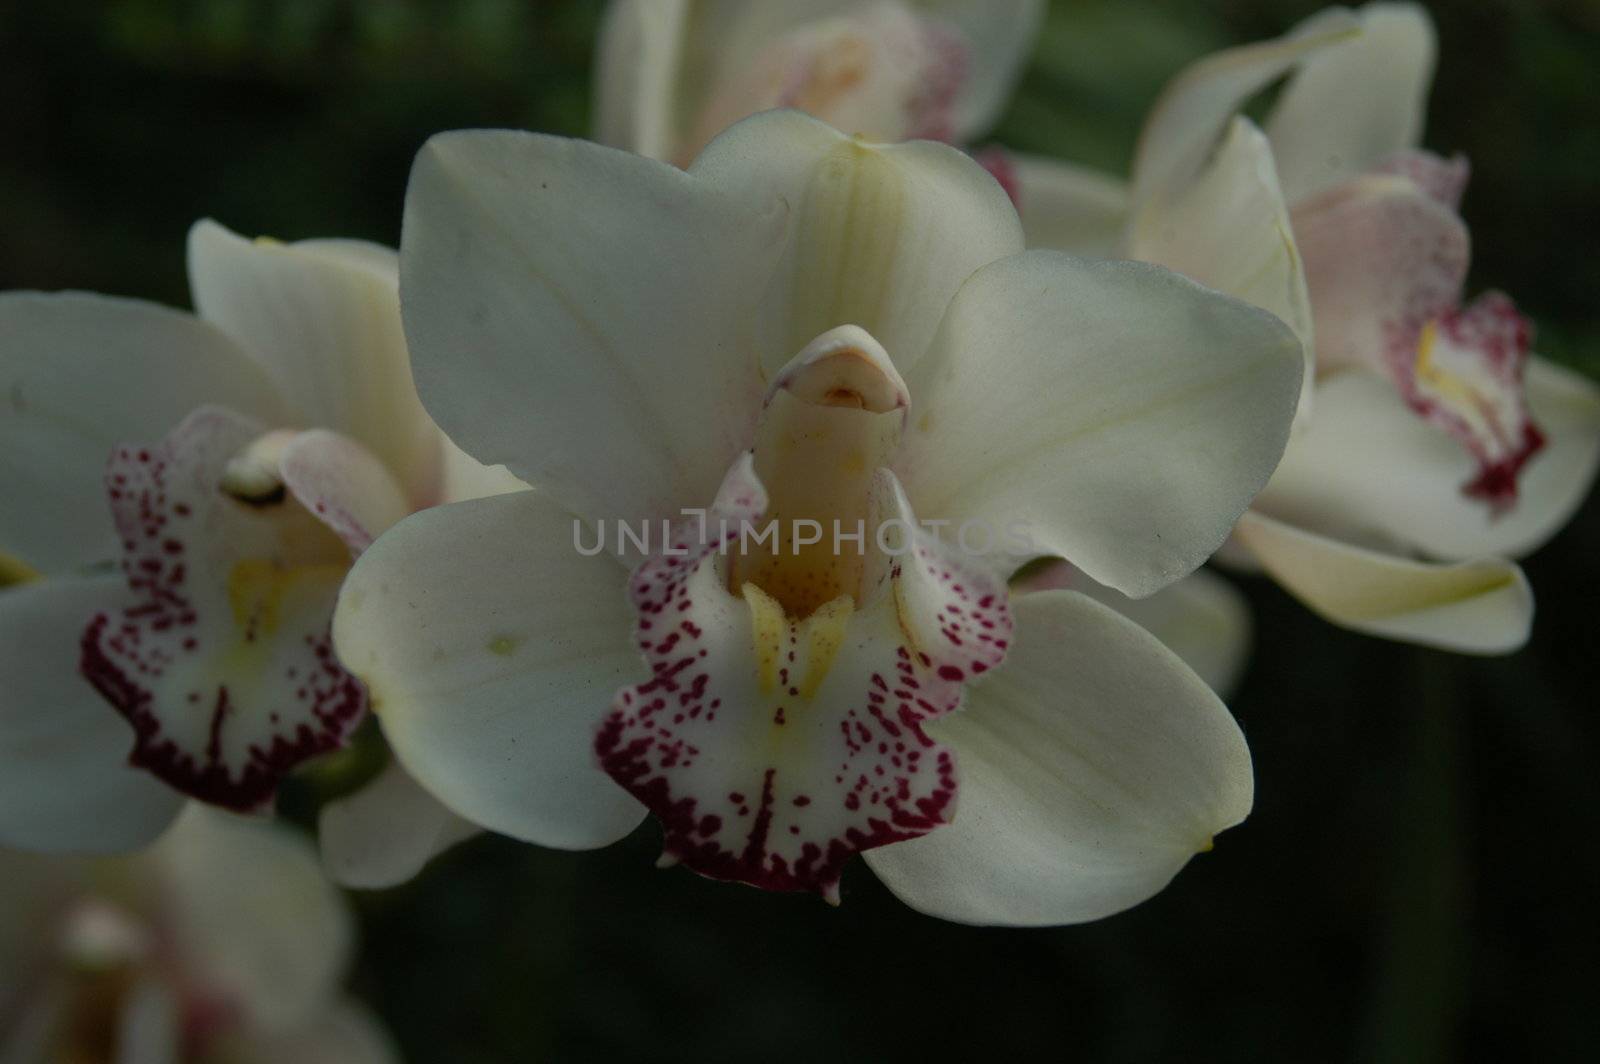 A closeup view of a white and purple orchid in bloom